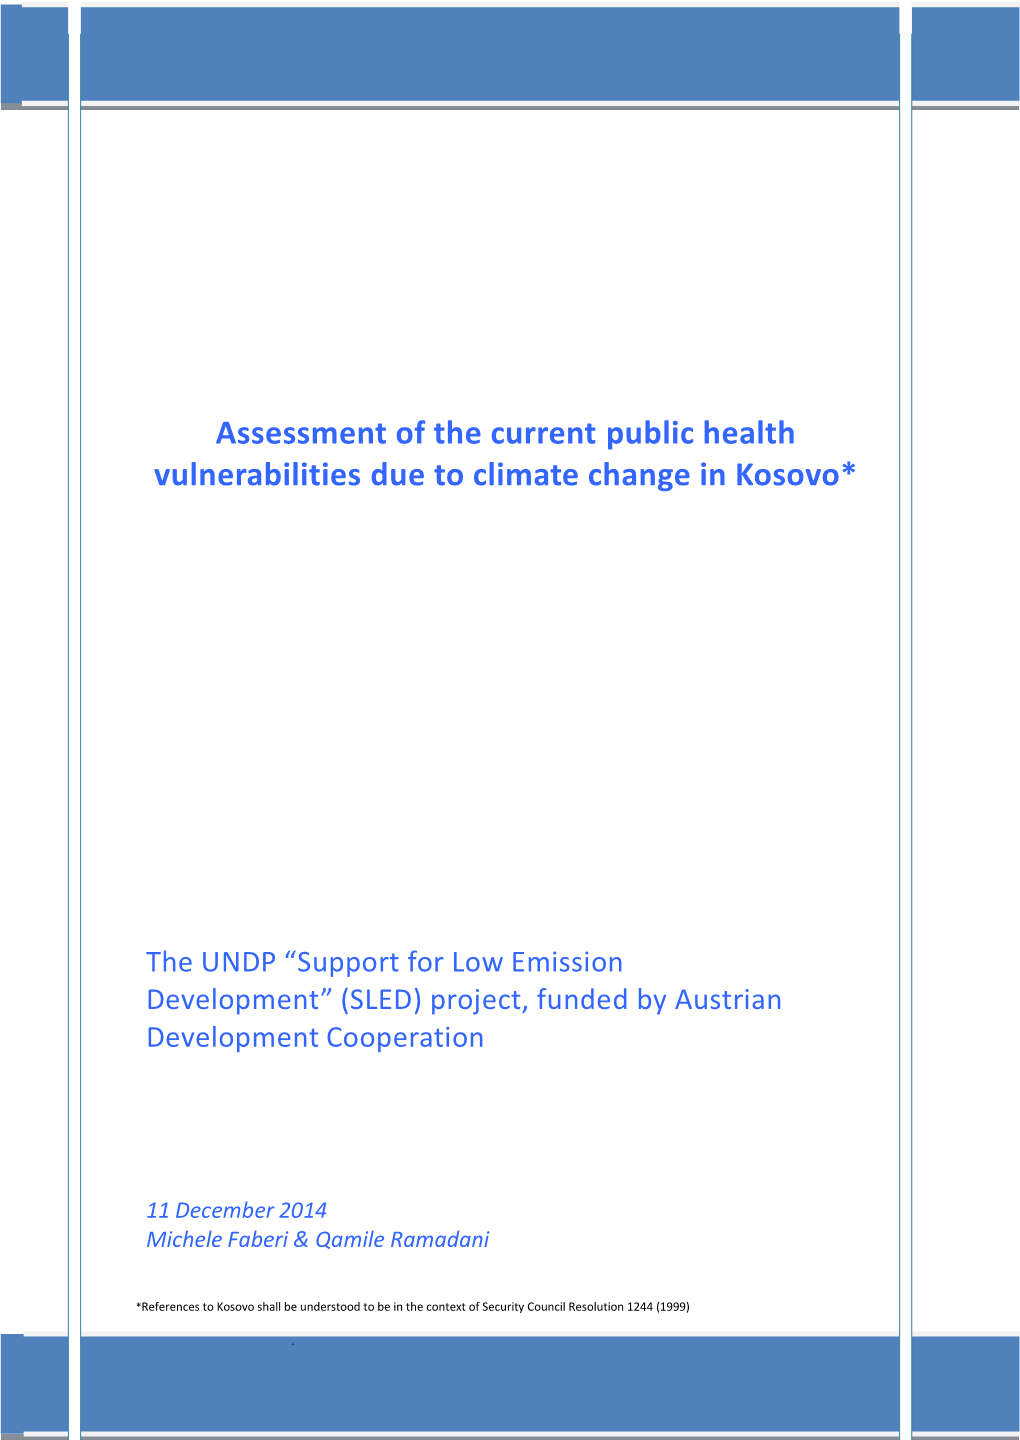 Assessment of the Current Public Health Vulnerabilities Due to Climate Change in Kosovo*